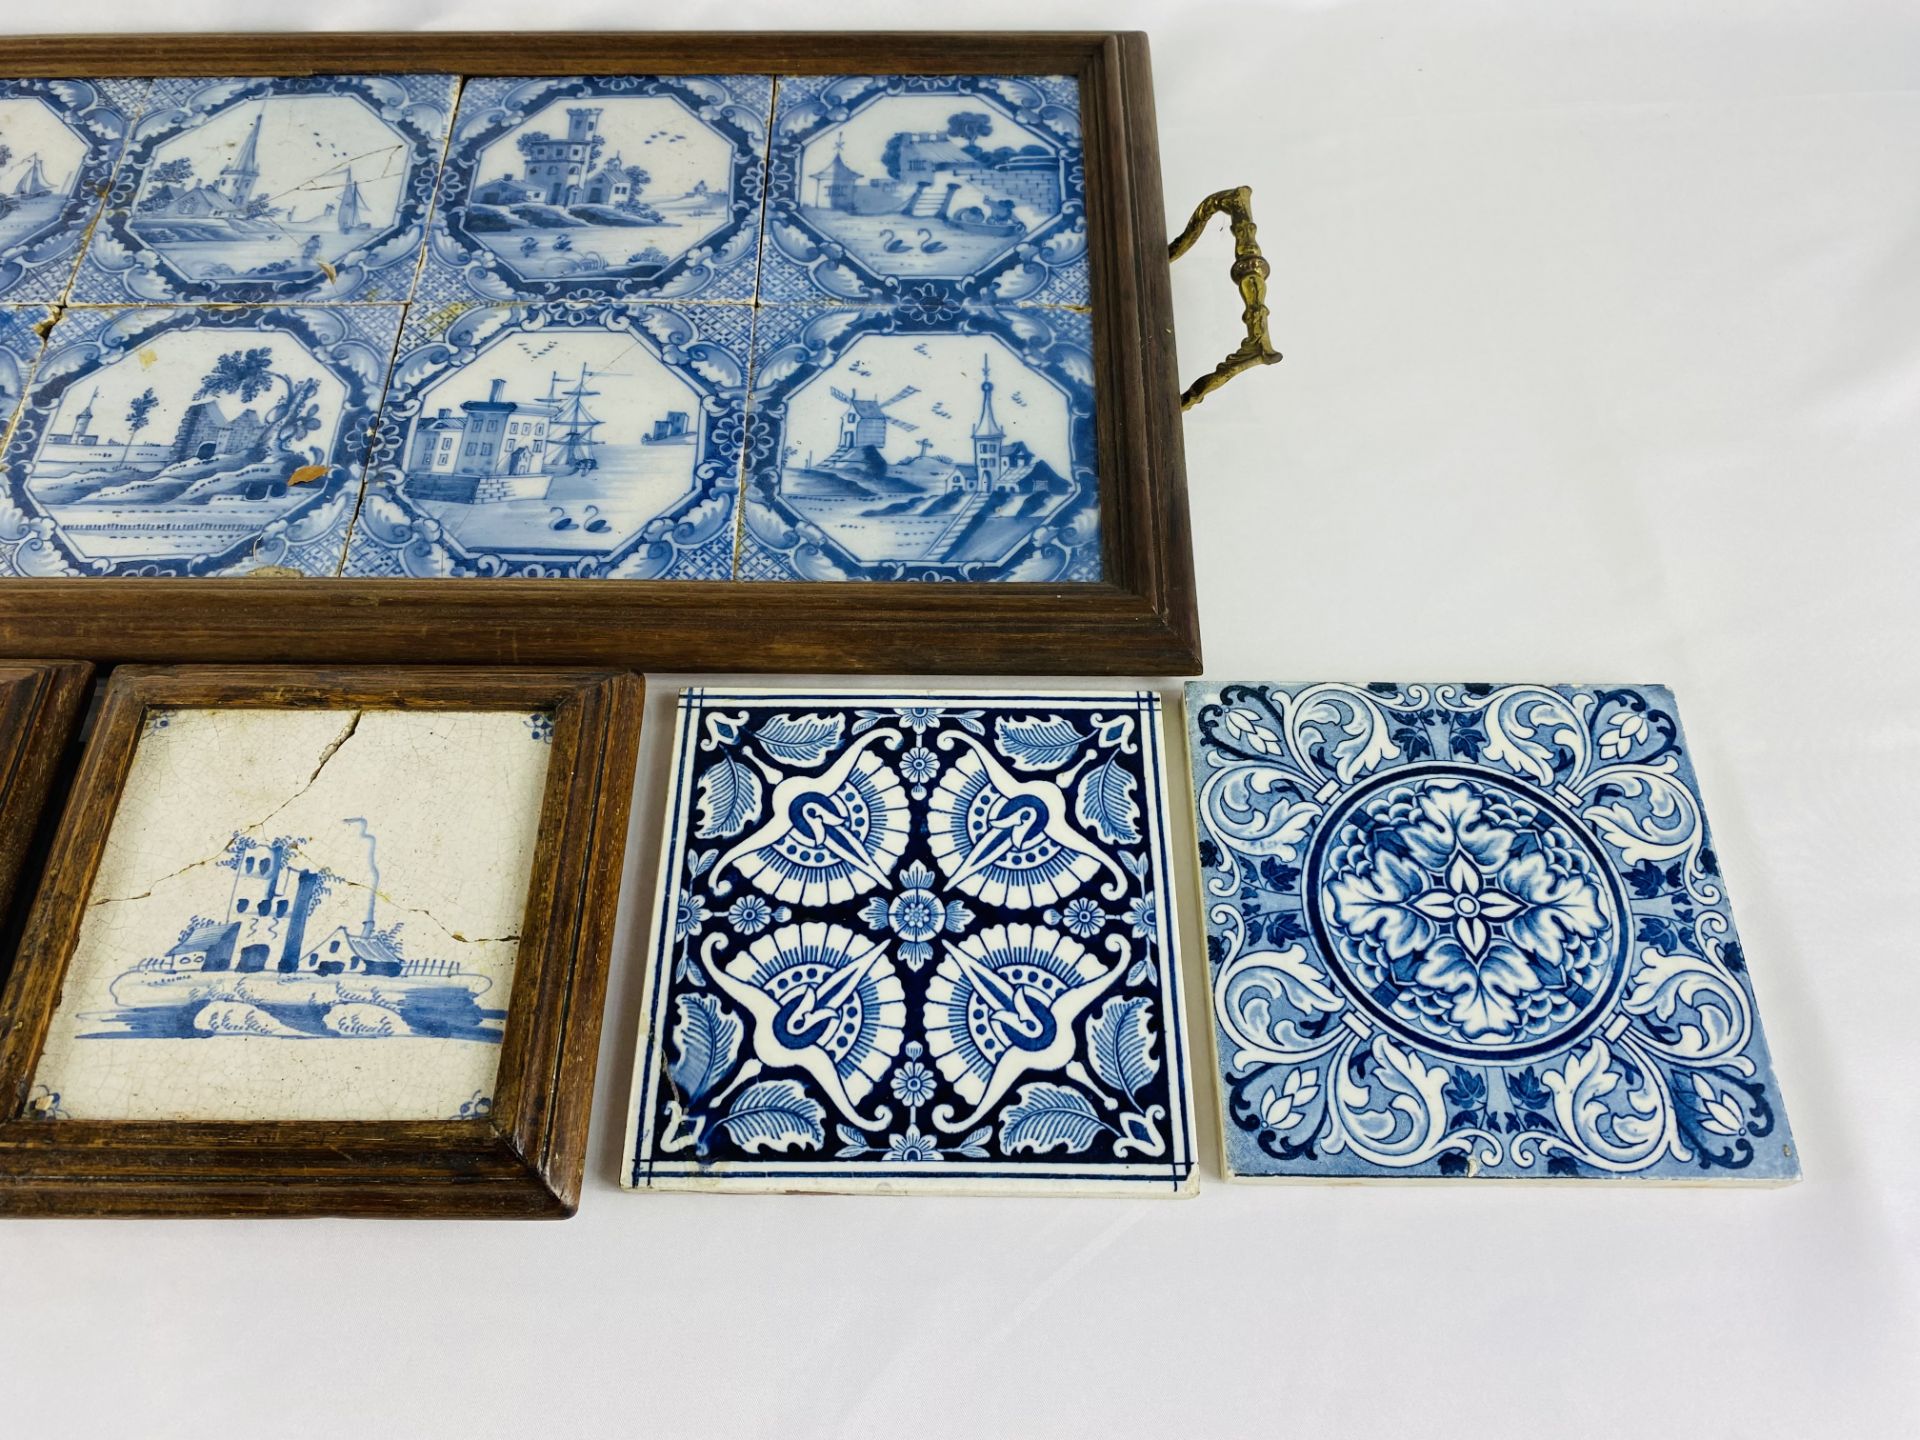 Delft tiles - Image 4 of 5